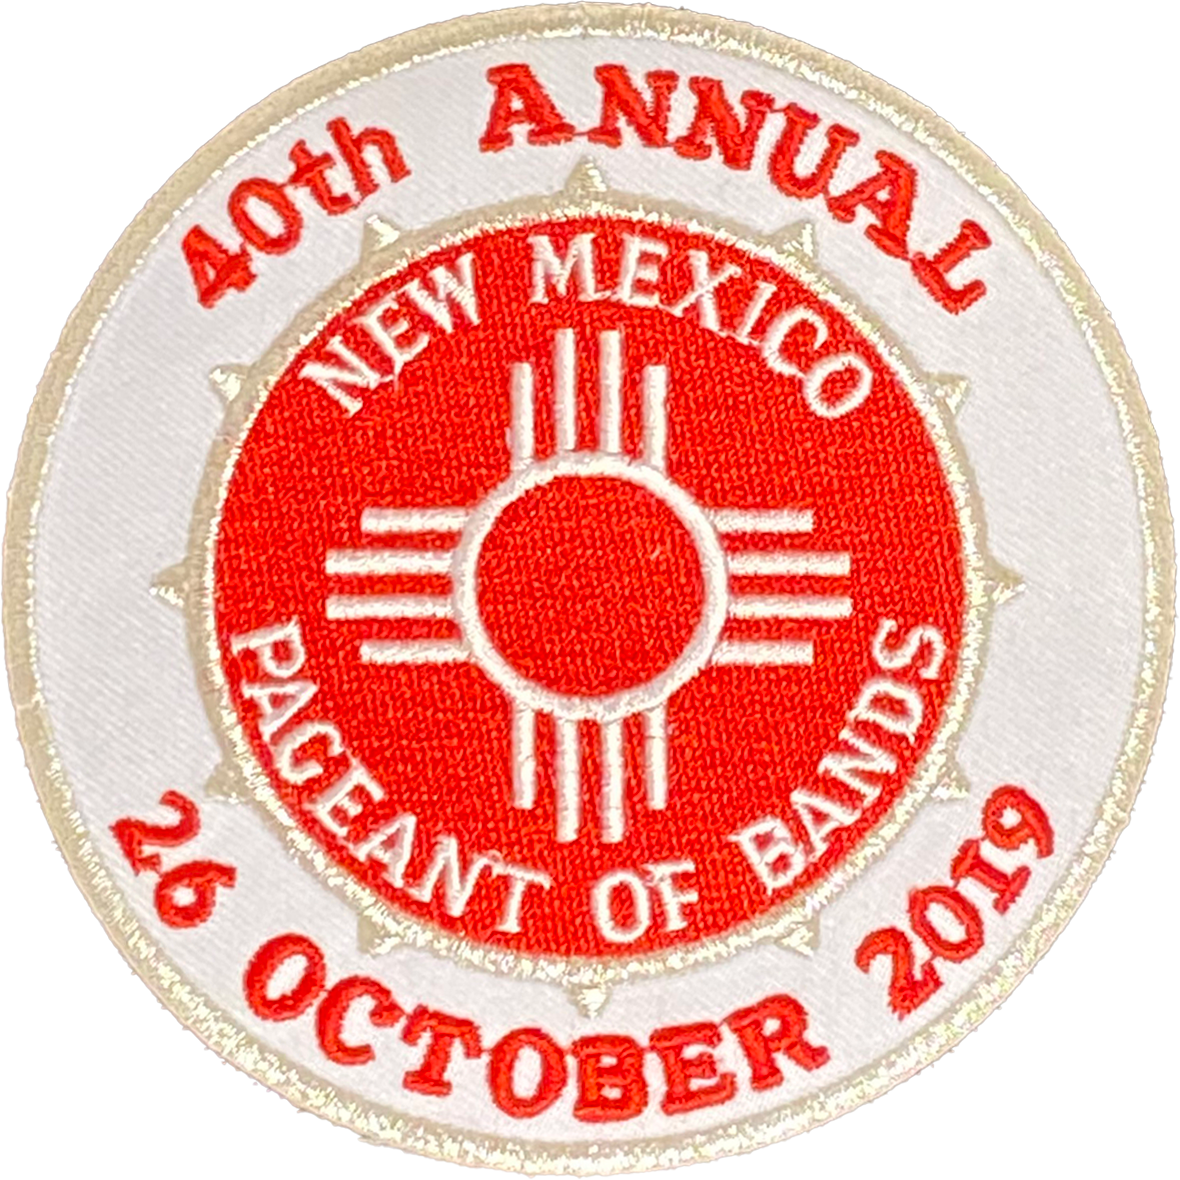 Pageant of Bands 2019 Patch